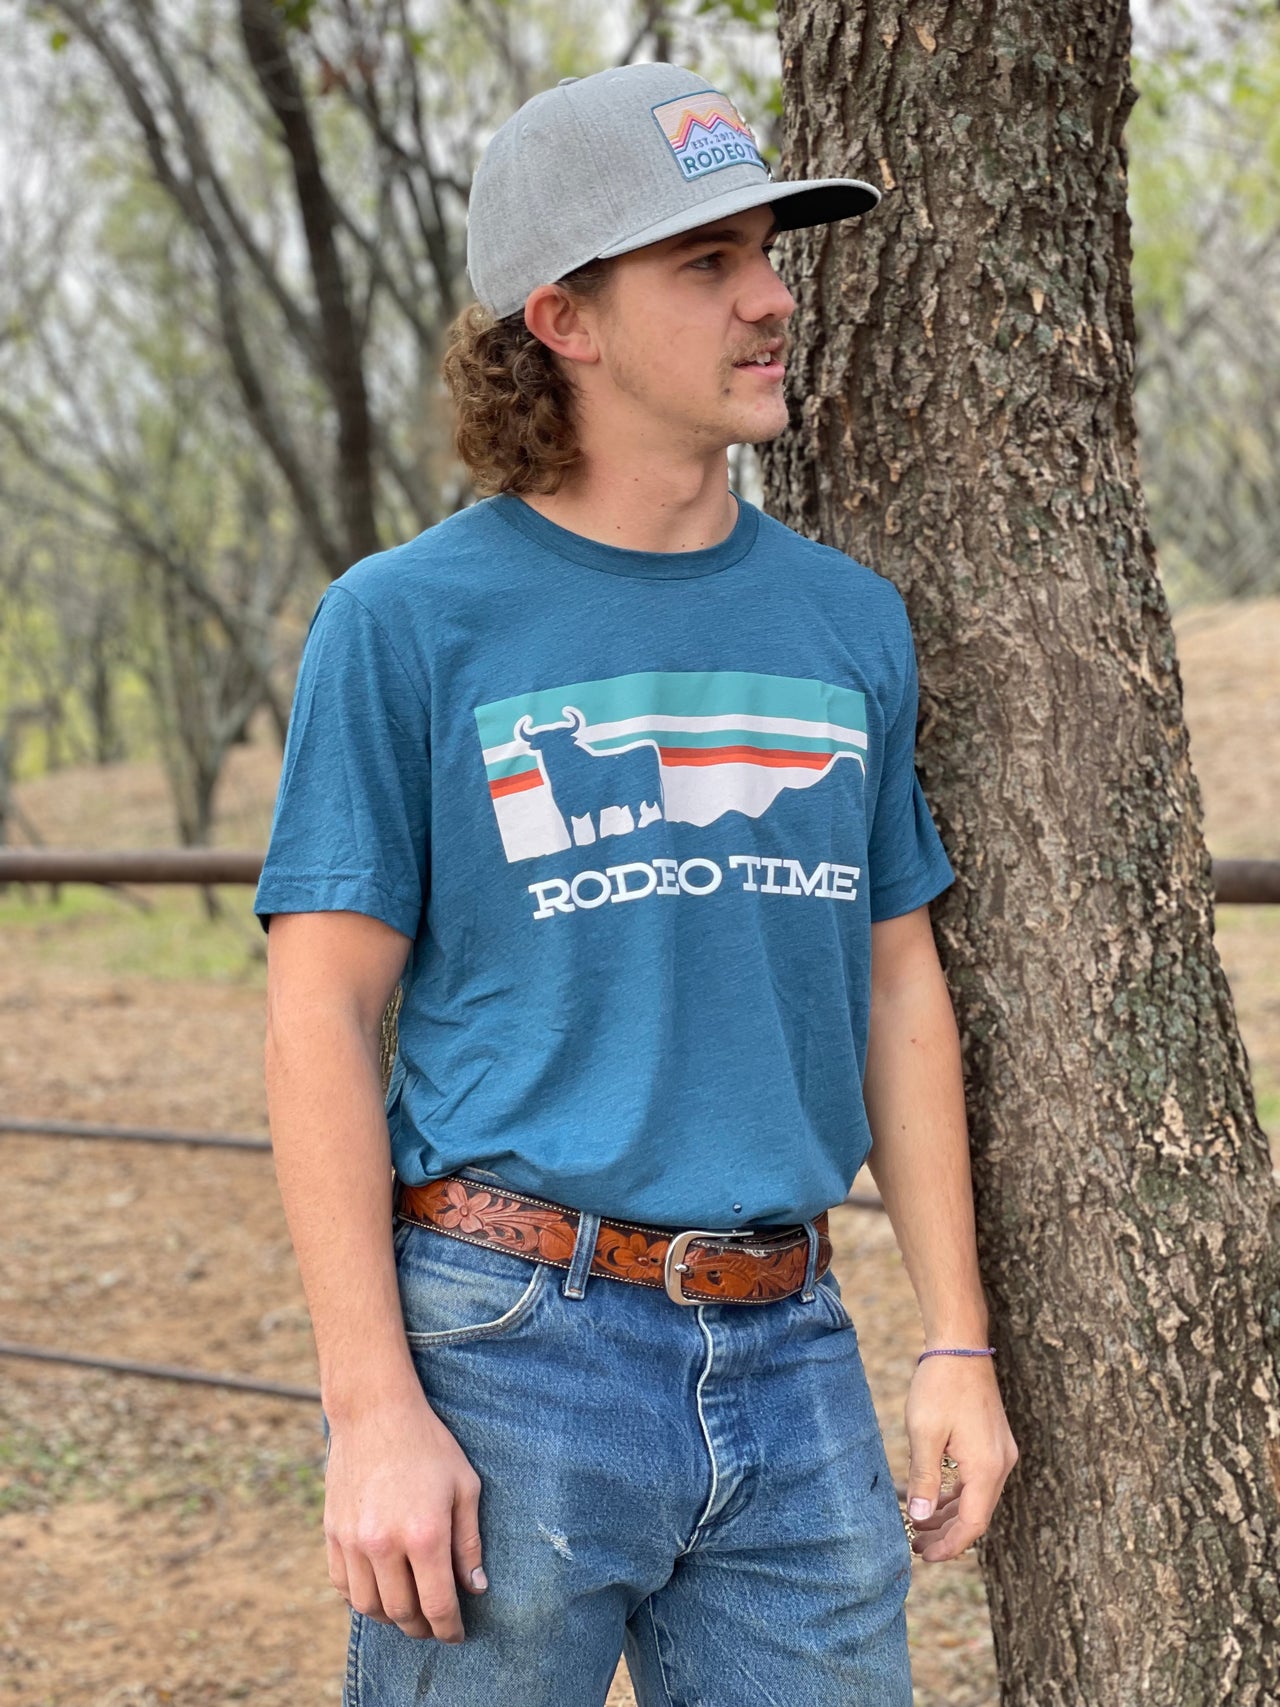 Rodeo Time Sunset Teal & Cream T